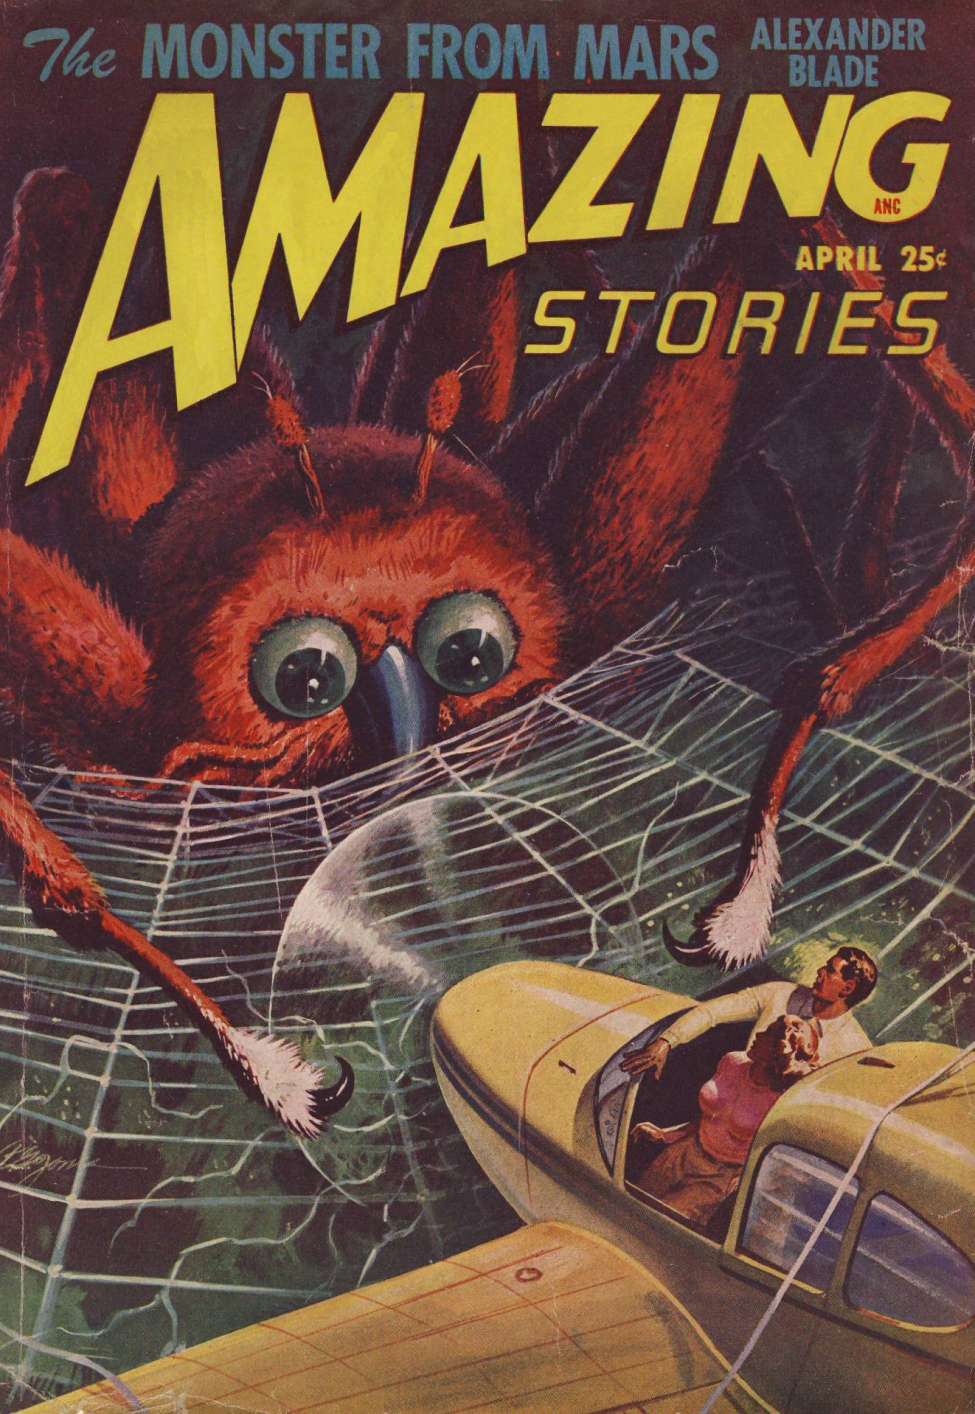 Book Cover For Amazing Stories v22 4 - The Monster from Mars - Alexander Blade